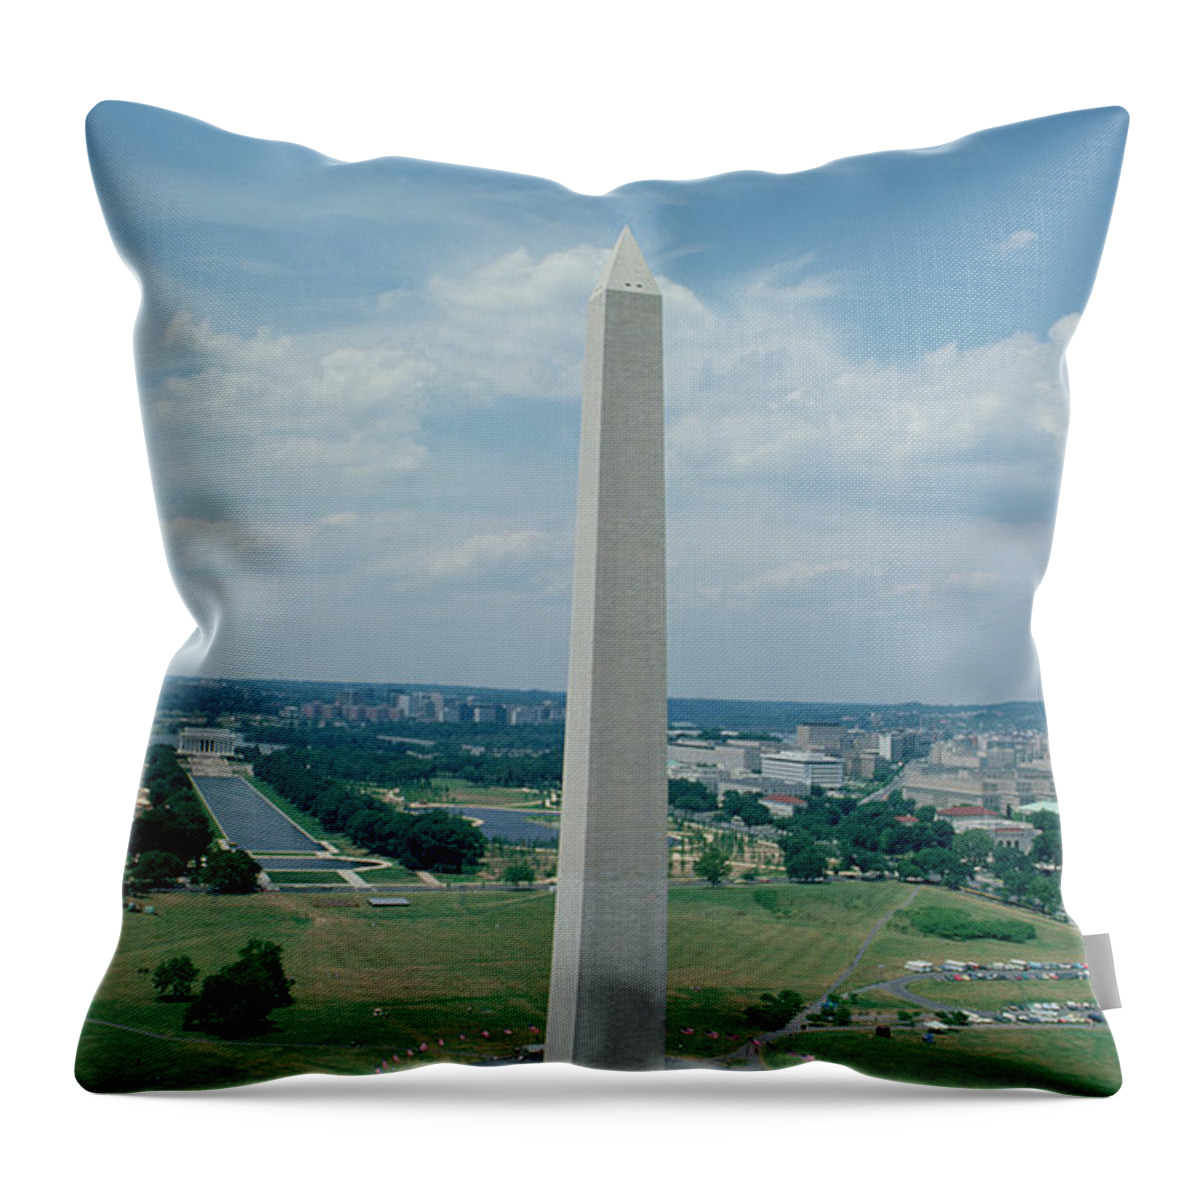 The Throw Pillow featuring the photograph The Washington Monument by American School